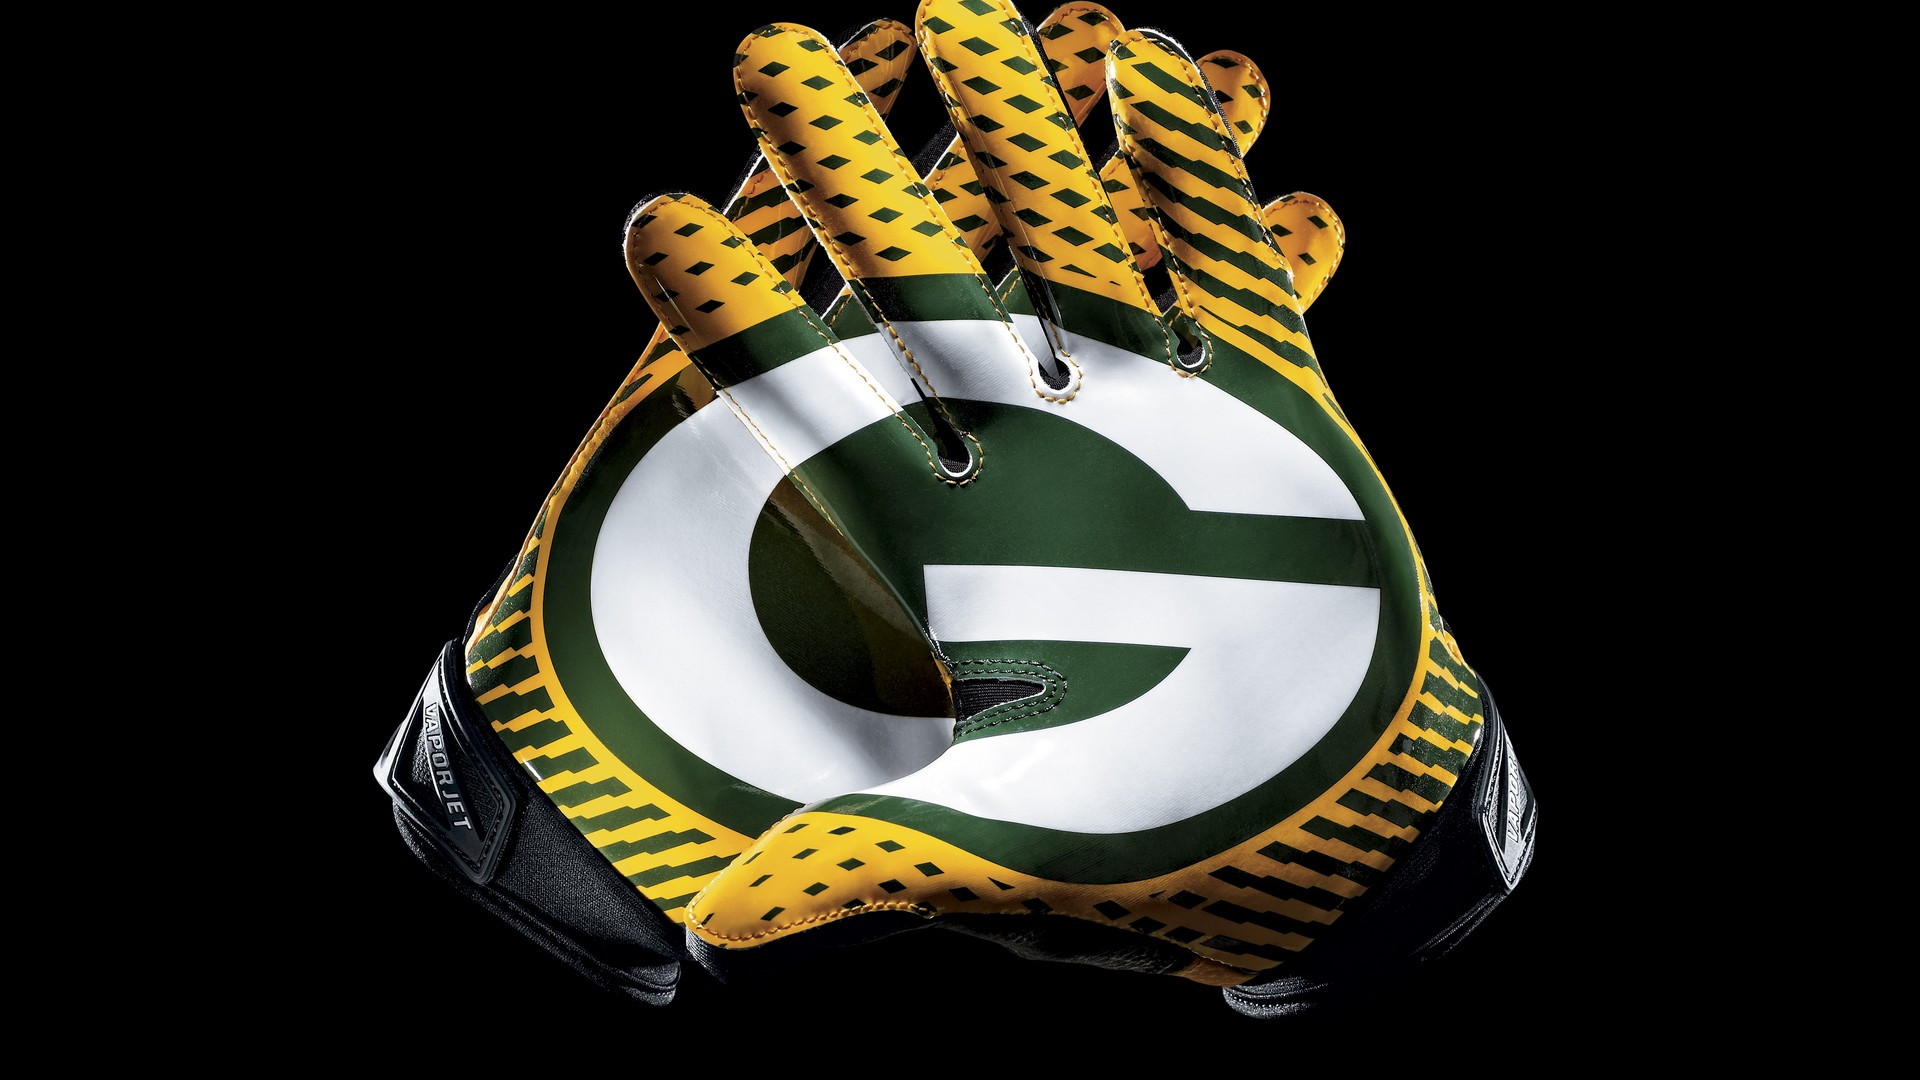 Green Bay Packers Macbook Backgrounds with high-resolution 1920x1080 pixel. You can use and set as wallpaper for Notebook Screensavers, Mac Wallpapers, Mobile Home Screen, iPhone or Android Phones Lock Screen